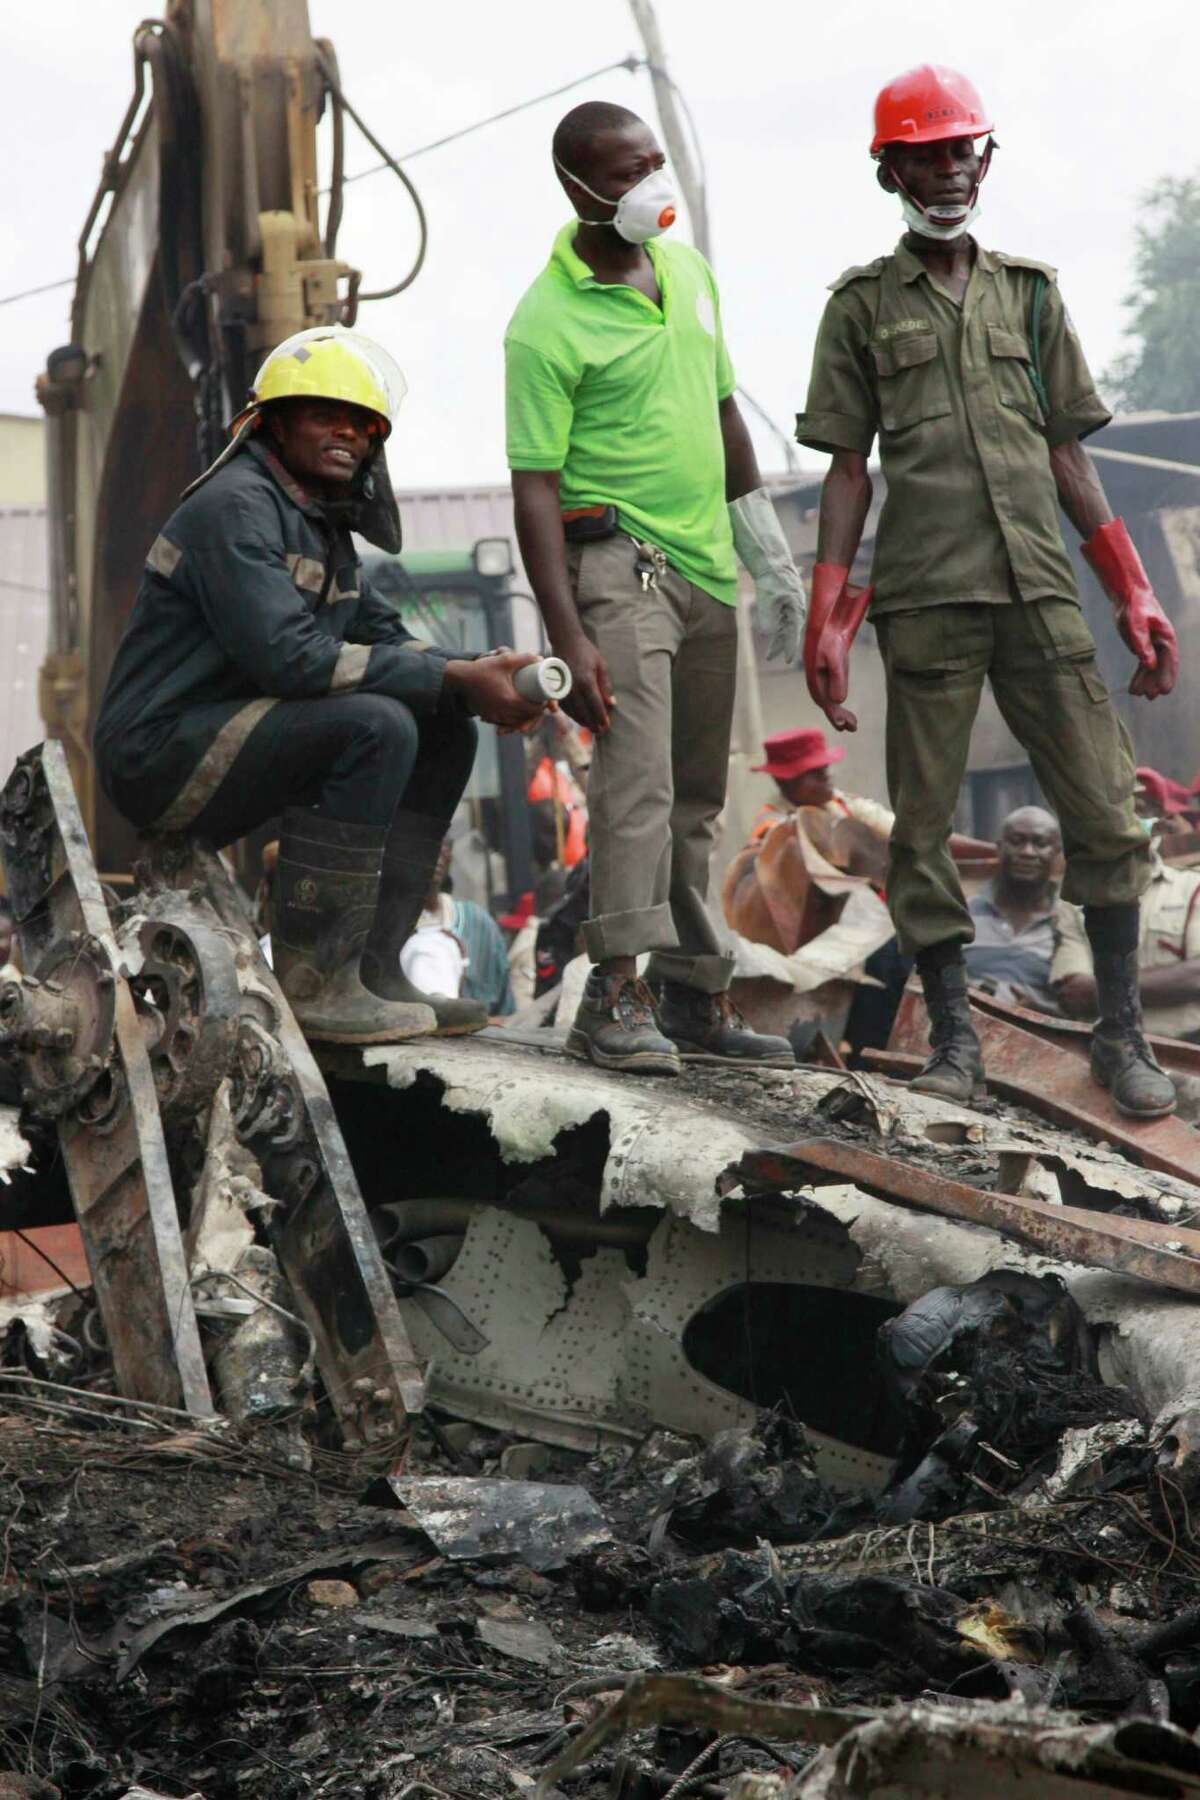 Rescue workers take a break at the site of a plane crash in Lagos, Nigeria, Monday, June 4, 2012. A passenger plane carrying more than 150 people crashed in Nigeria's largest city on Sunday, government officials said. Firefighters pulled at least one body from a building that was damaged by the crash and searched for survivors as several charred corpses could be seen in the rubble.(AP Photo/Sunday Alamba)